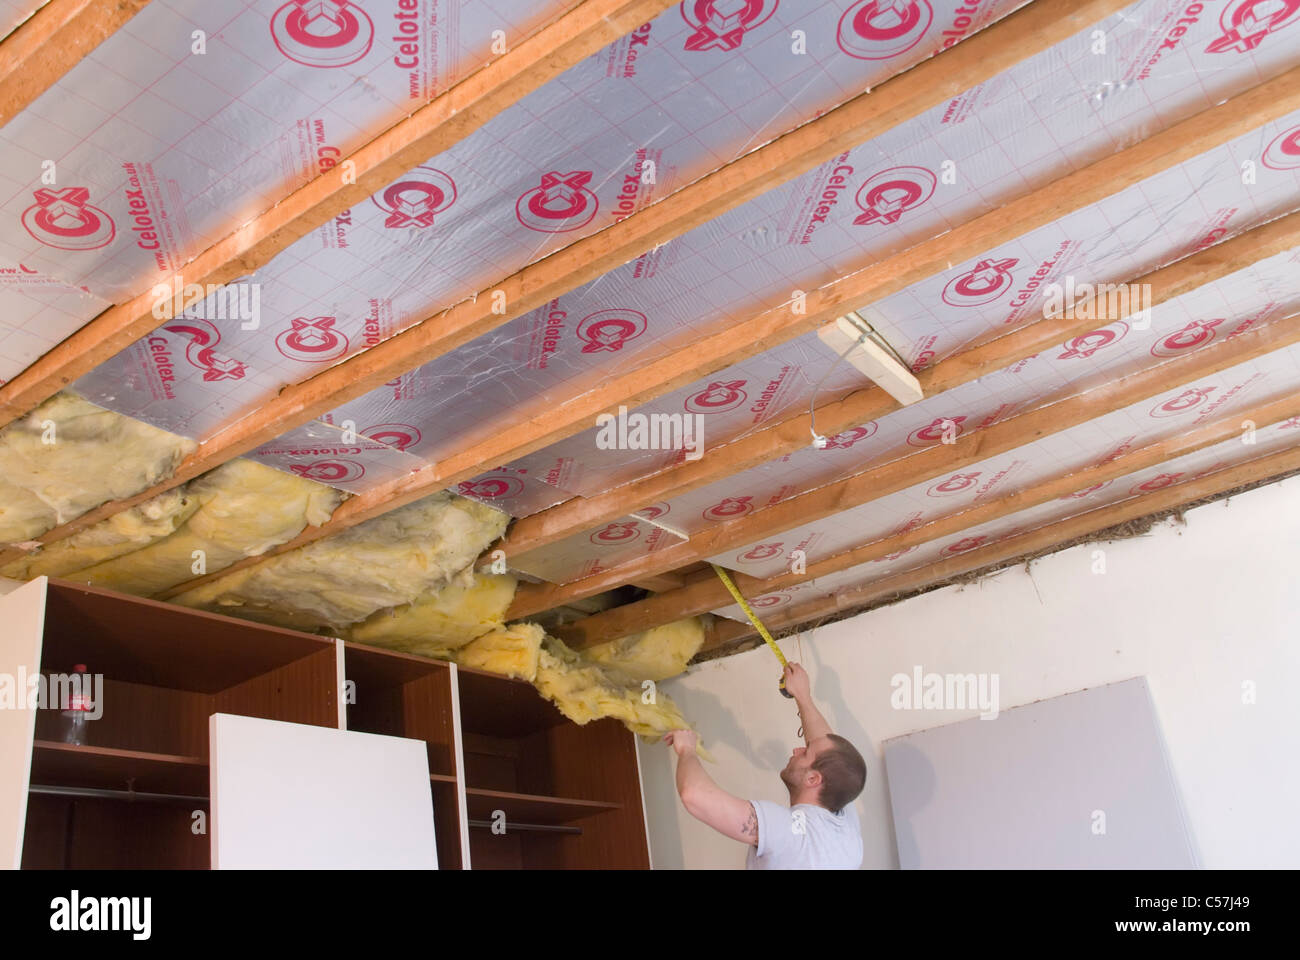 Builders installing high performance Kingspan Therma and Celotex insulation boards to the walls and ceiling of an older house Stock Photo